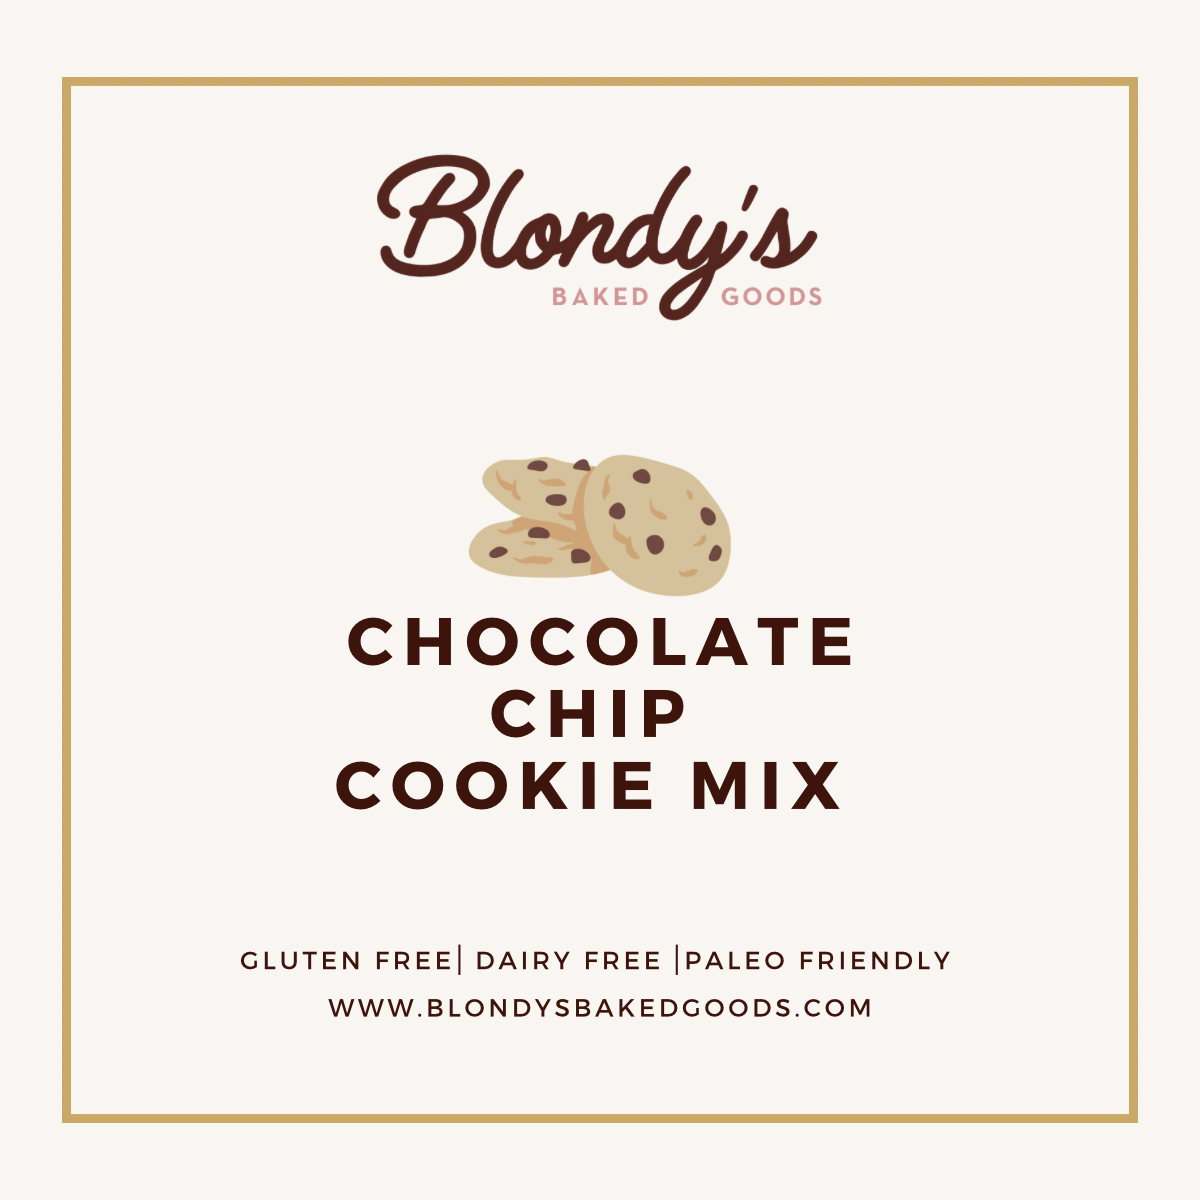 Blondy's Baked Goods